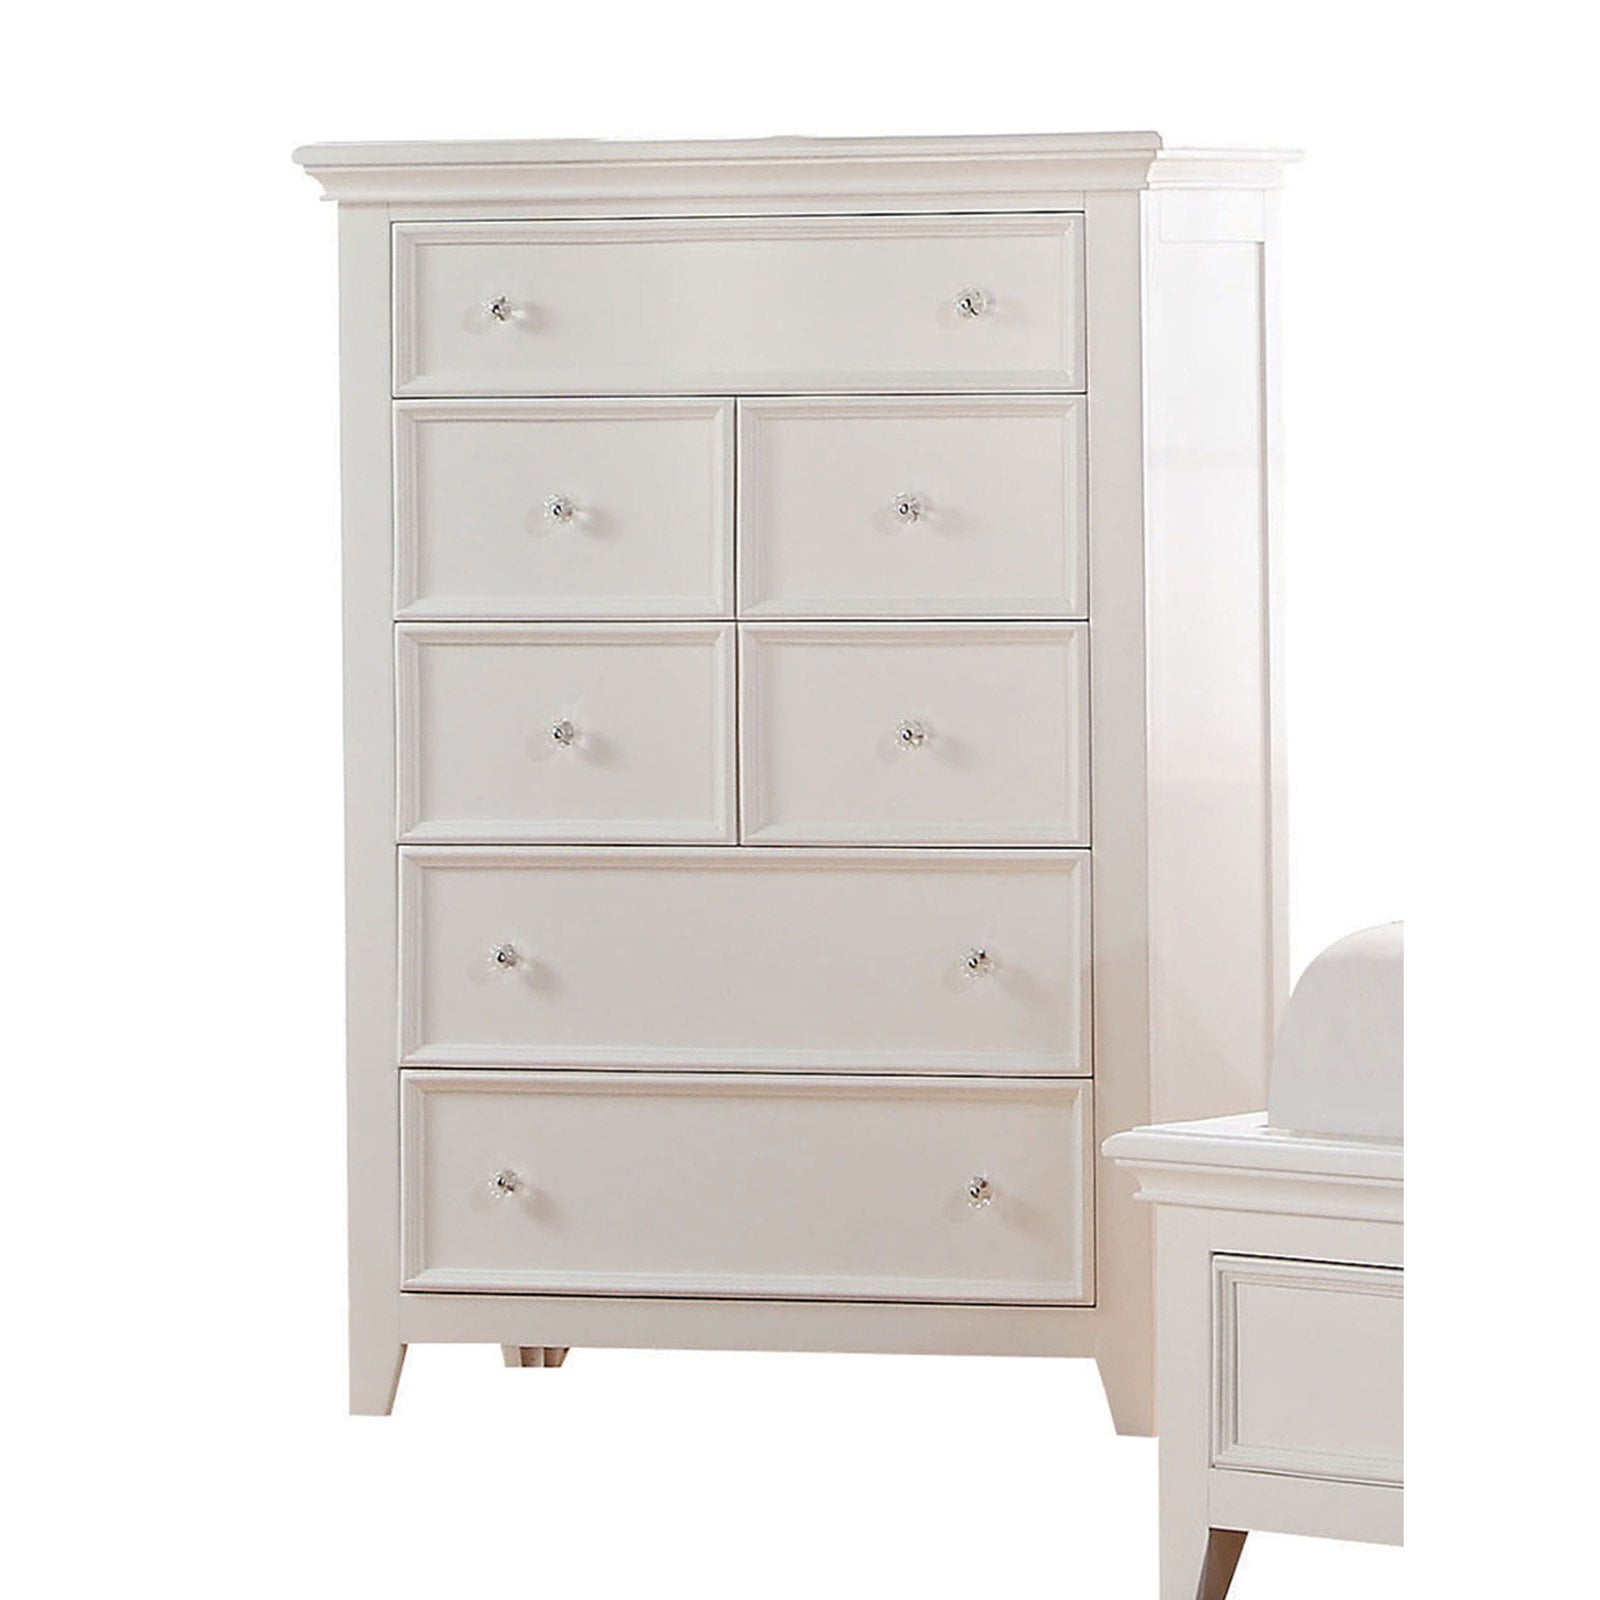 Picture of ACME 30602 Lacey Chest, White - 36 x 18 x 50 in.